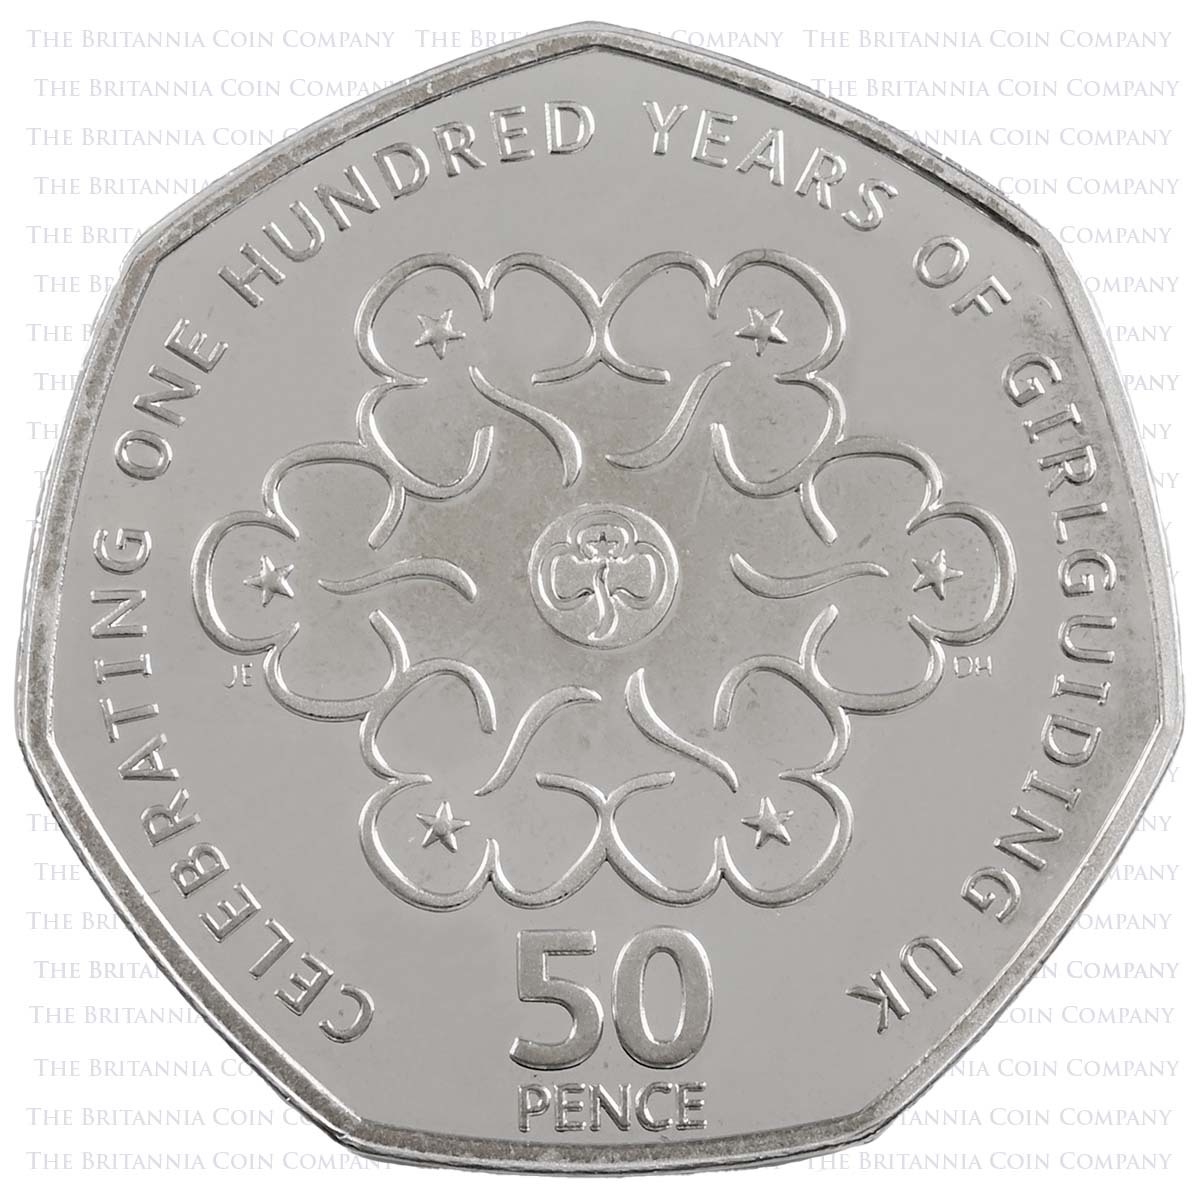 UKGGPF 2010 Girl Guides 50p Piedfort Silver Proof Reverse